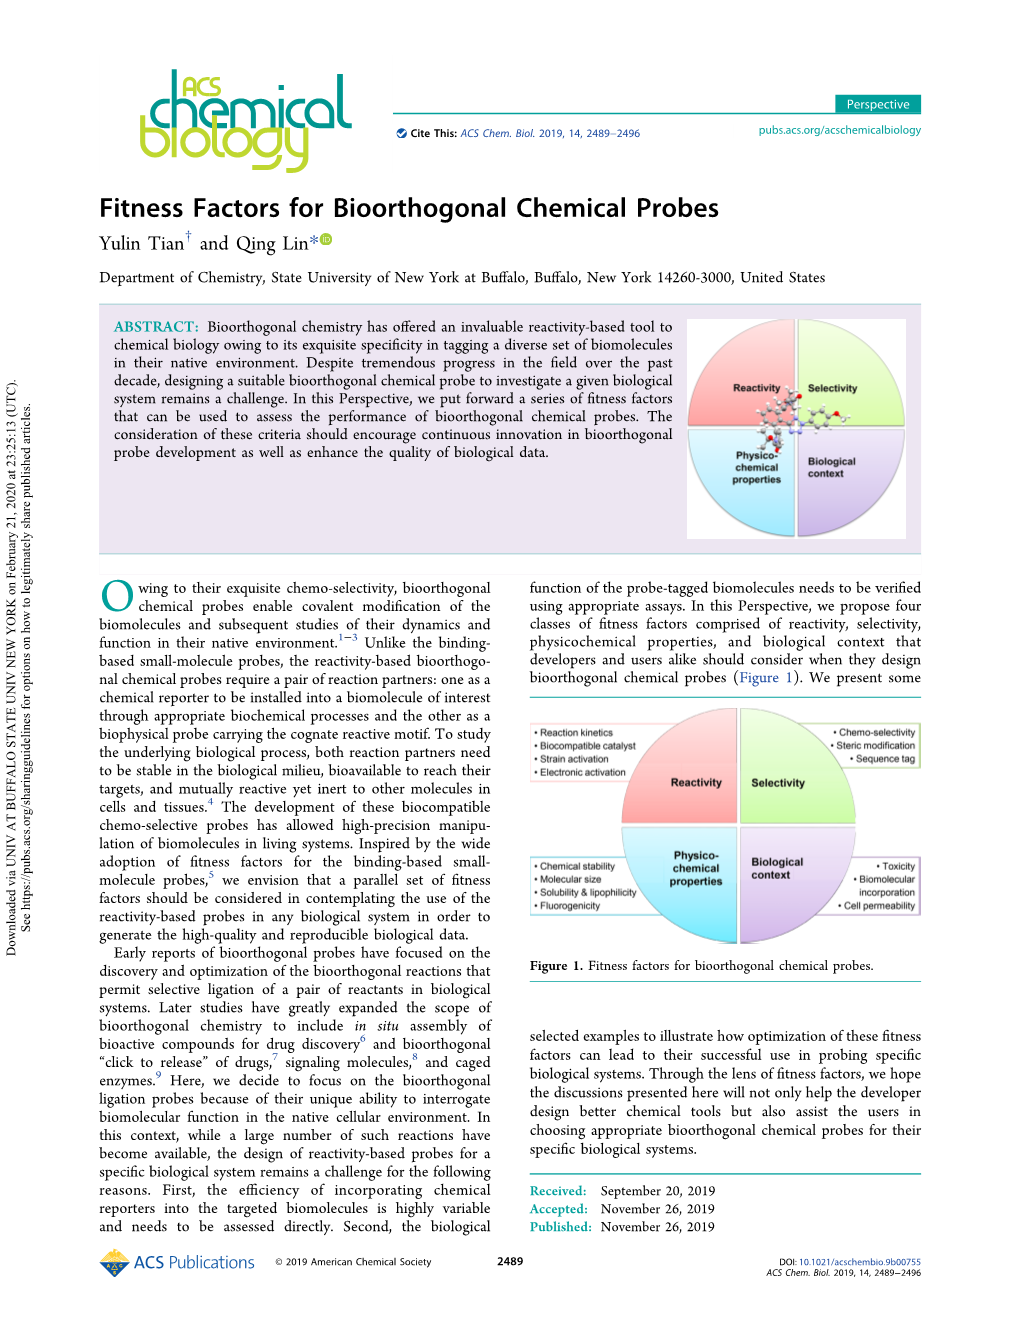 Fitness Factors for Bioorthogonal Chemical Probes